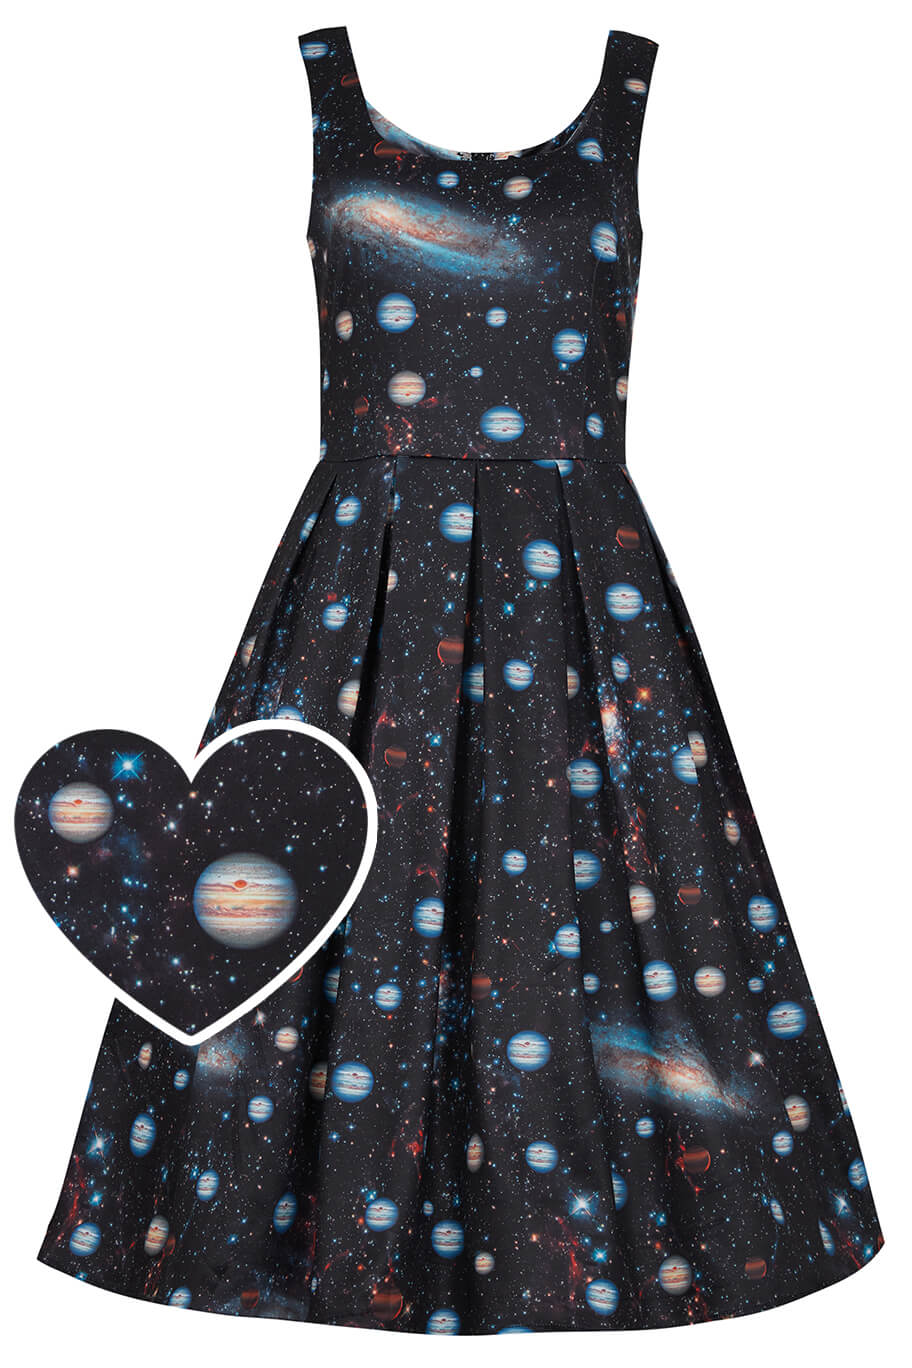 Universe Galaxy Space Print Dress With Pockets front view